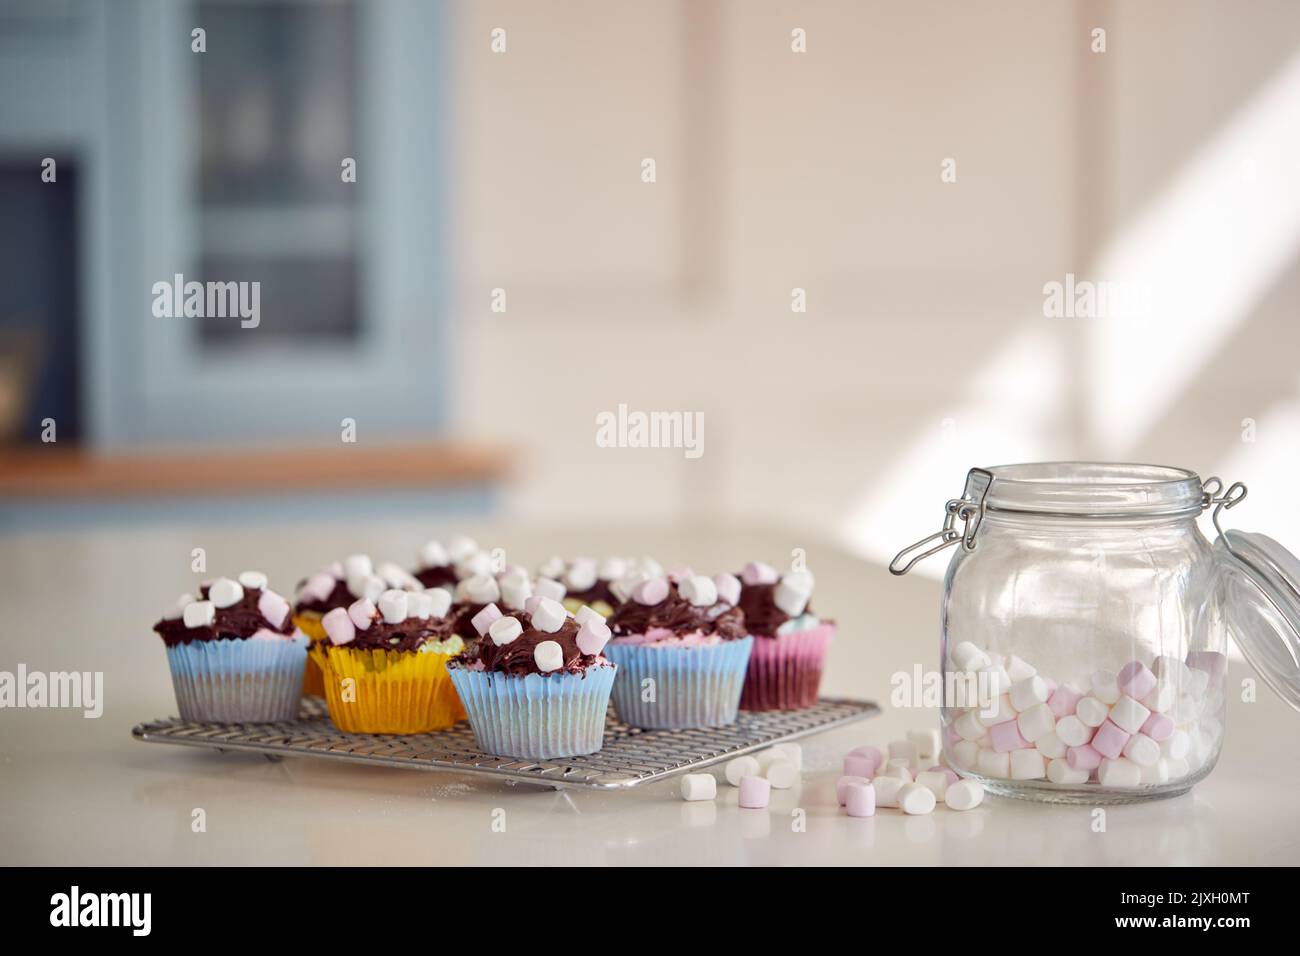 Close Up Of Marshmallows And Decorated Cupcakes On Cooling Rack In Kitchen Stock Photo